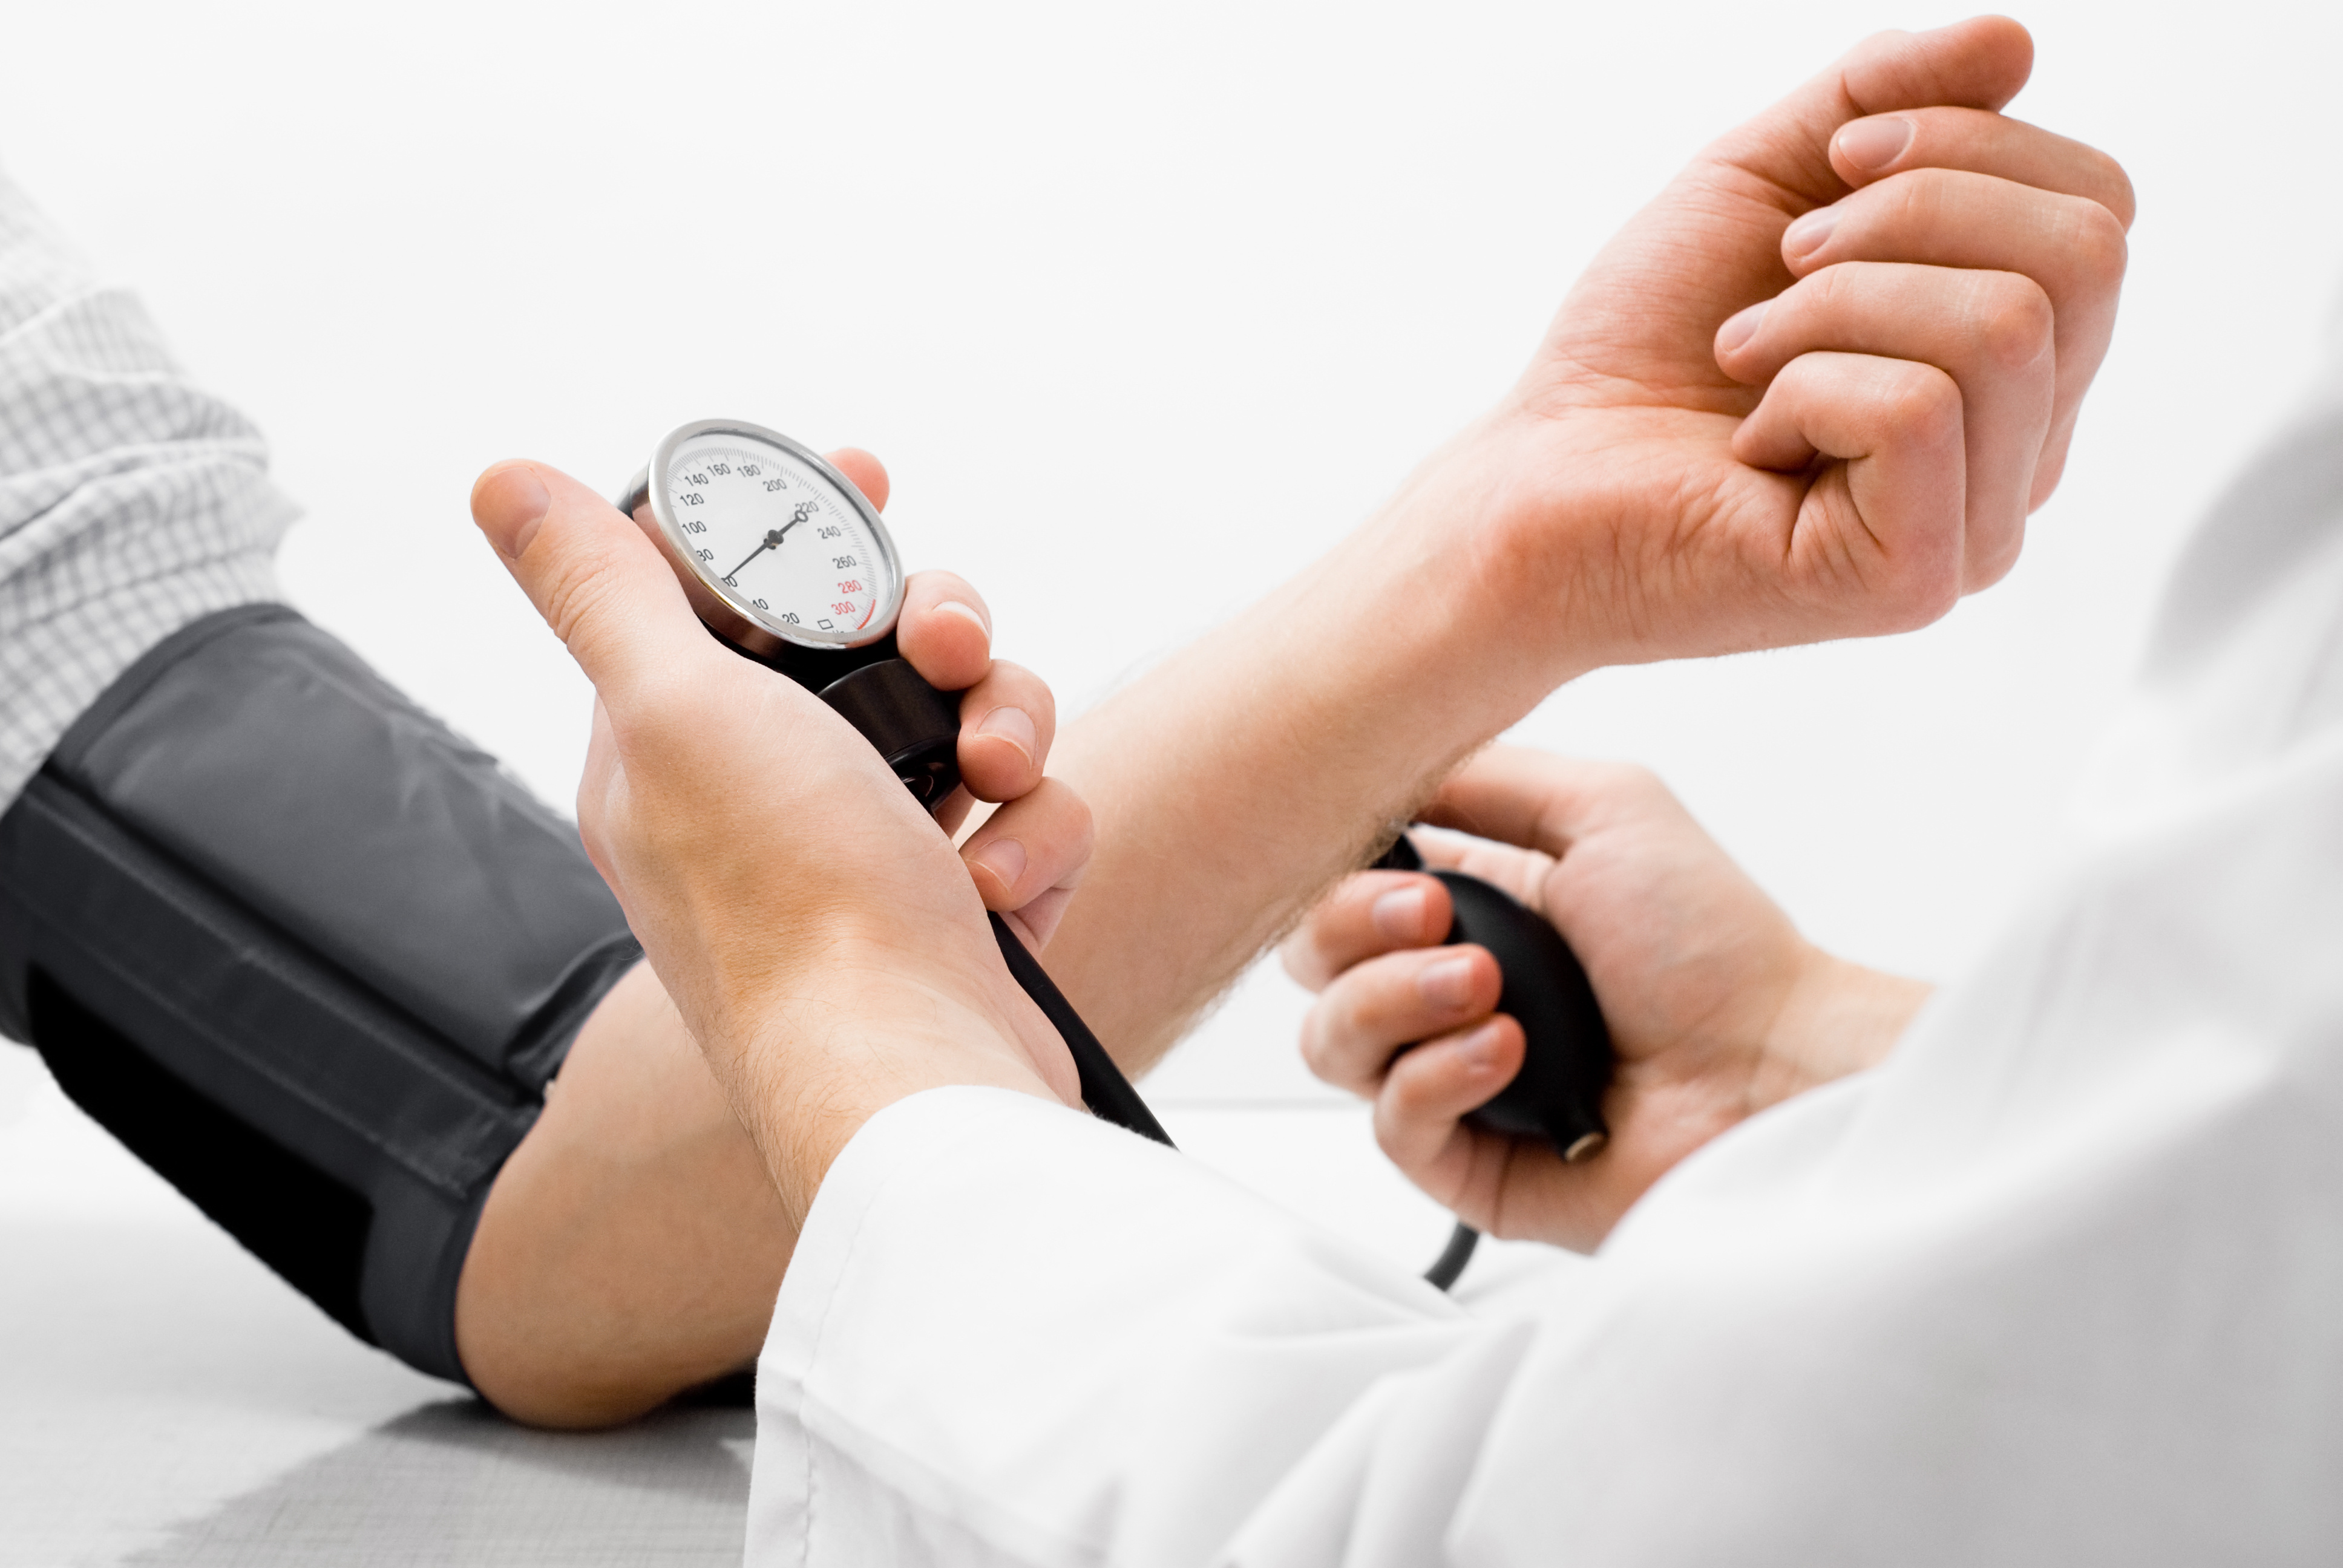 A new study about blood pressure will change the way doctors practice medicine